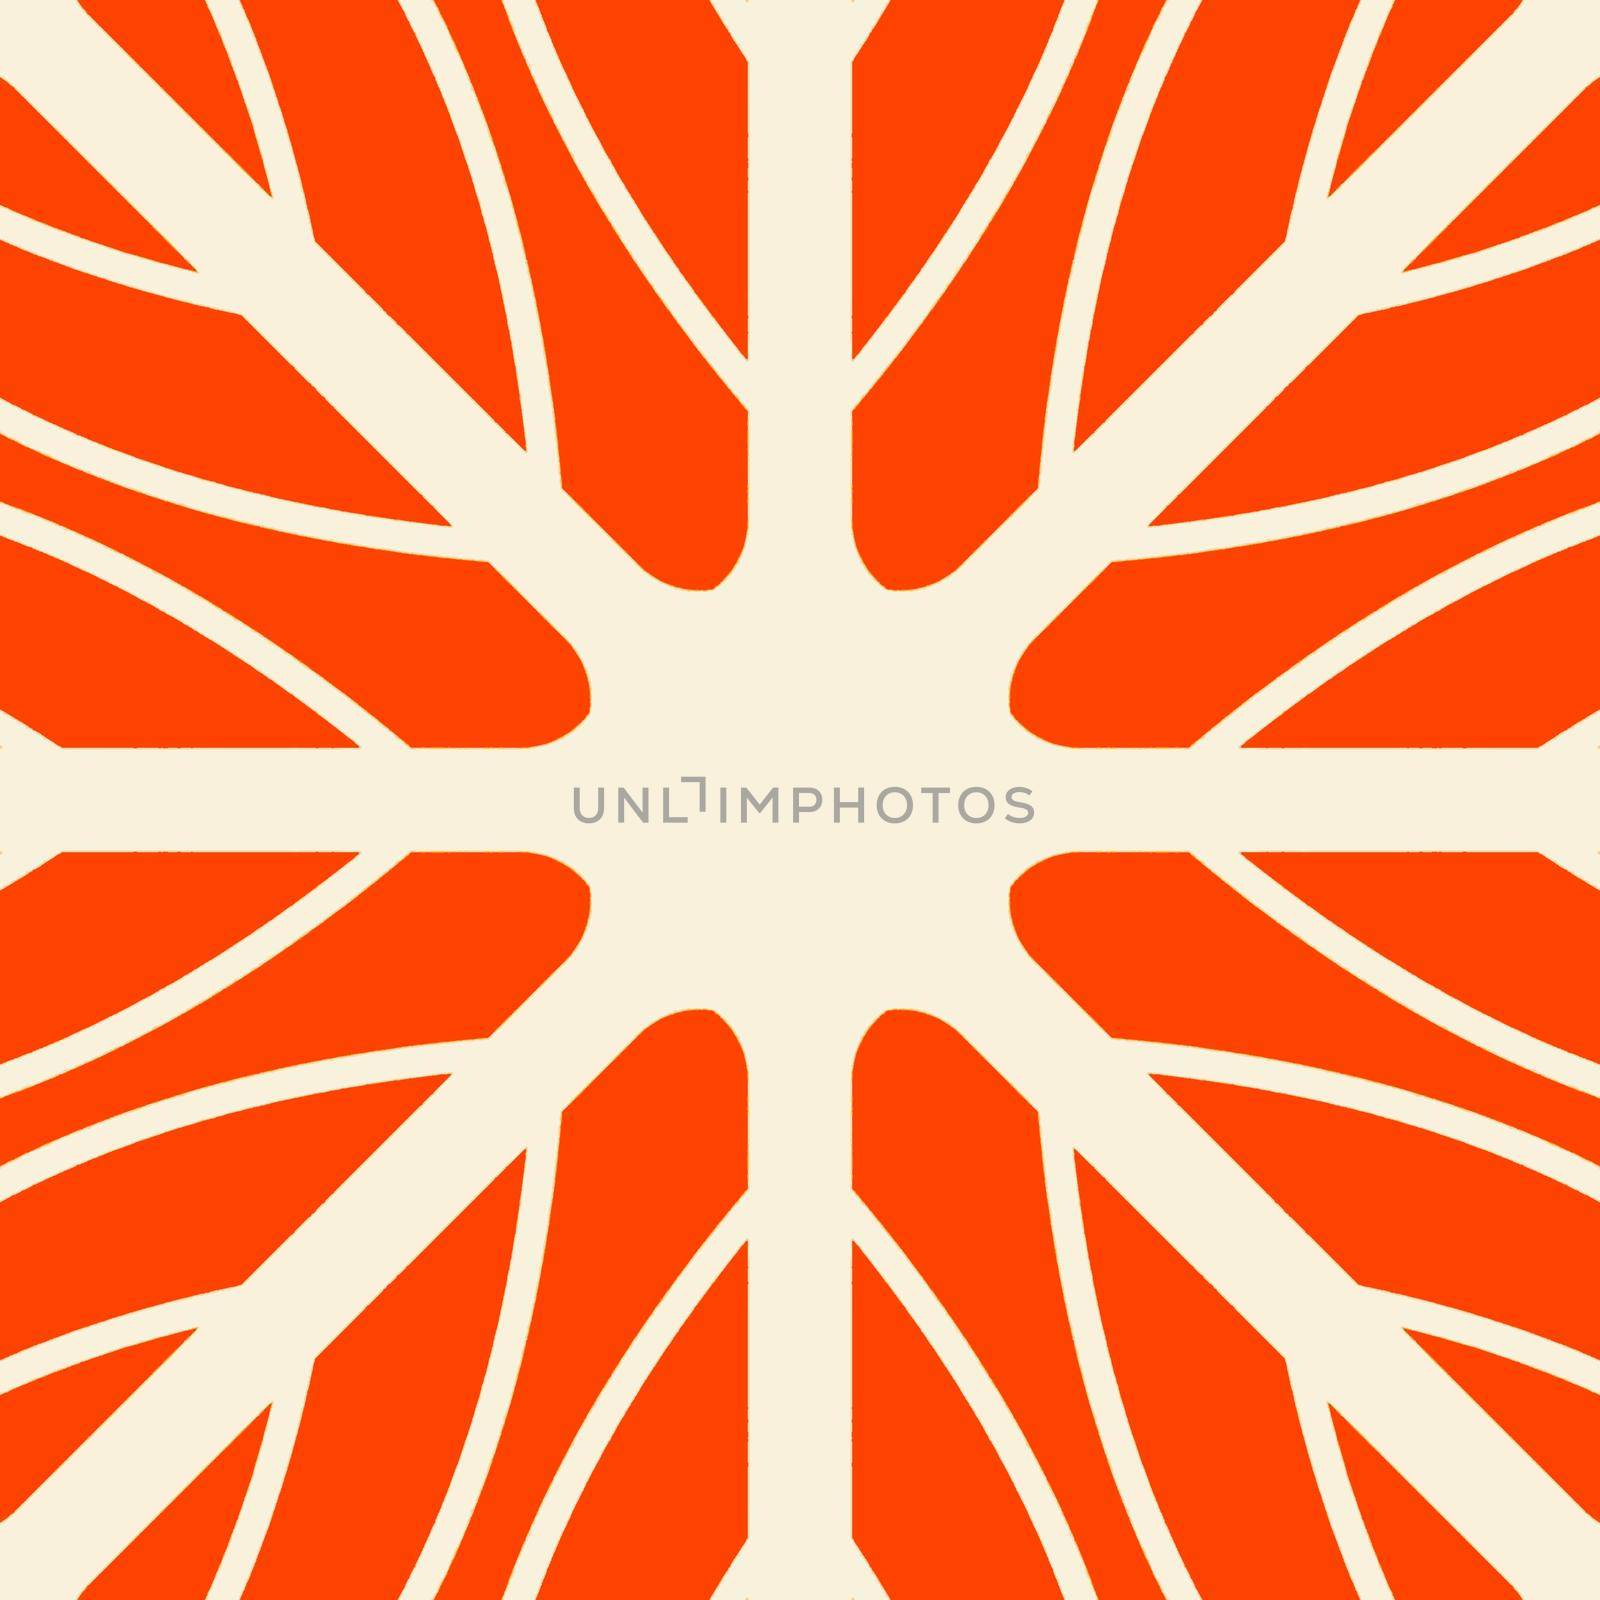 Beautiful shades of orange color symmetrical patterns illustration designs. Concept of home decor and interior designing.